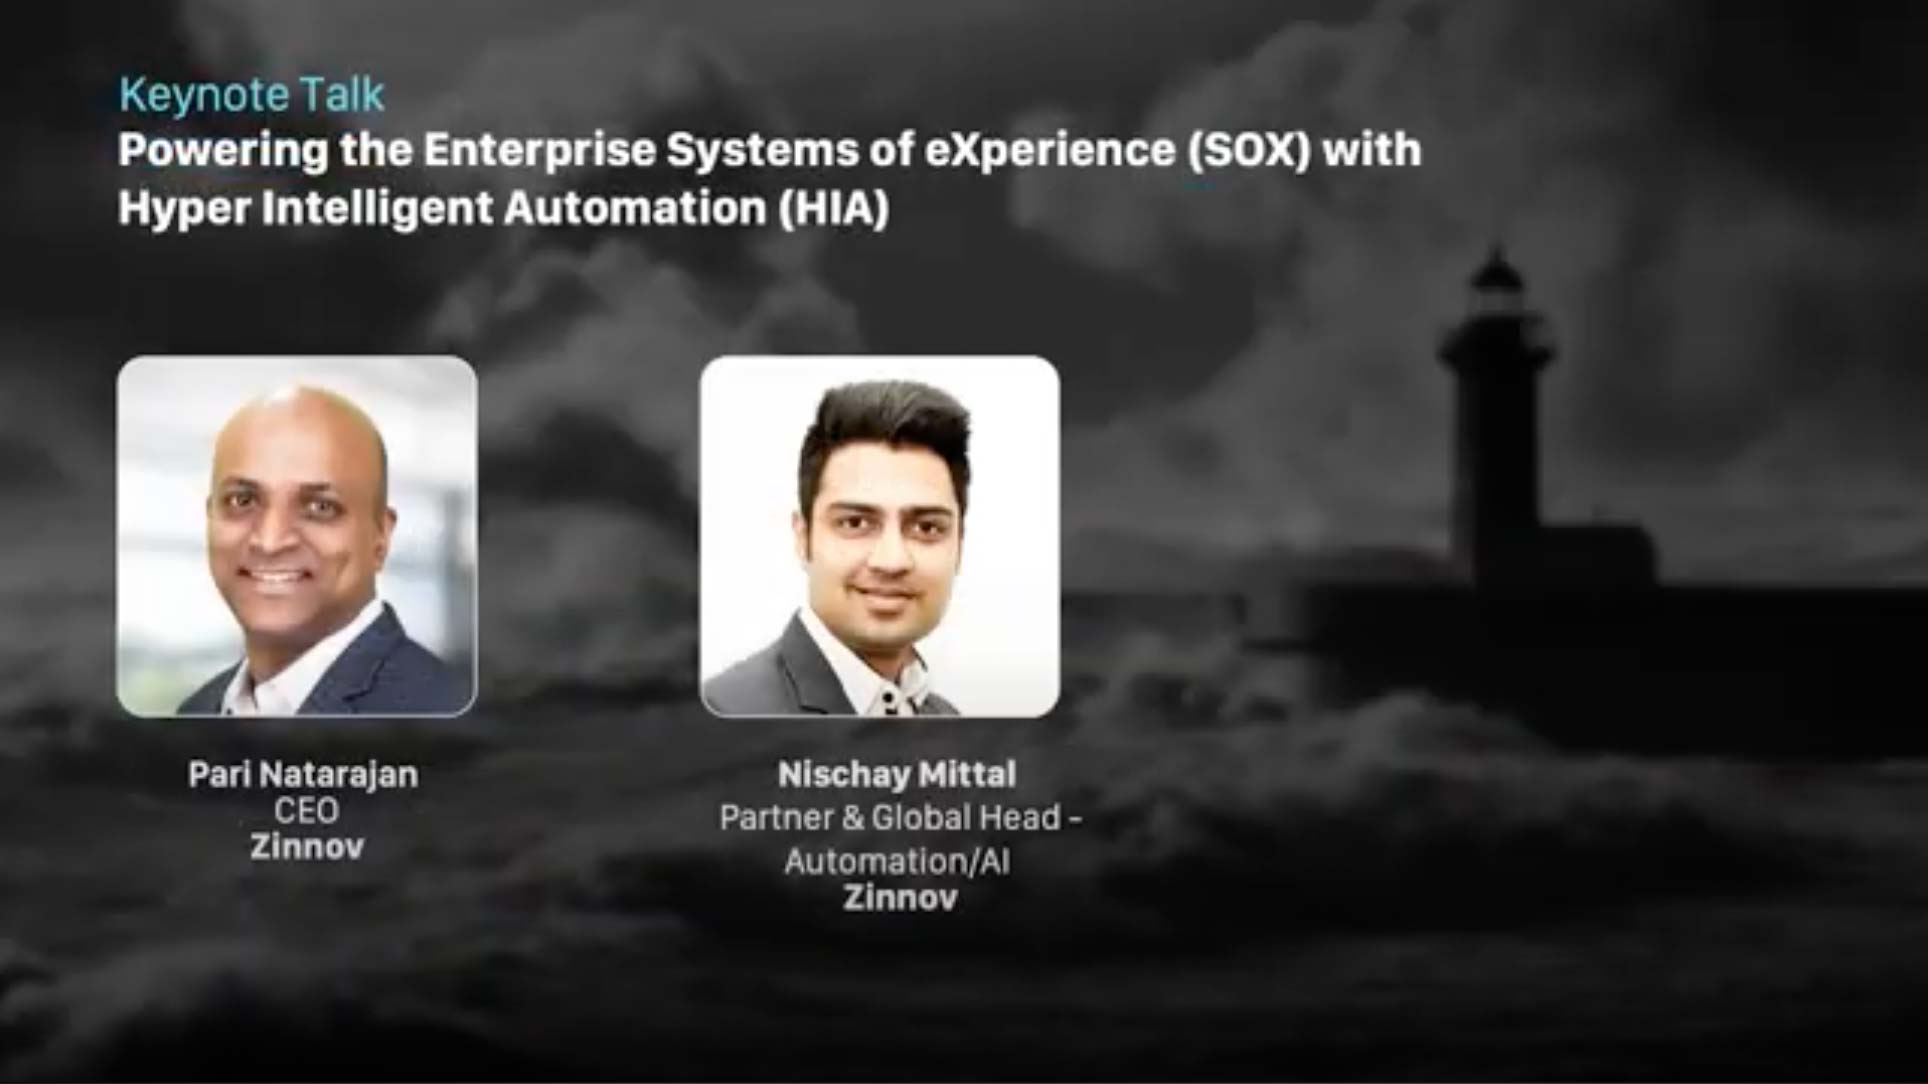 Powering the Enterprise Systems of eXperience (SOX) with HIA​ | Keynote Talk